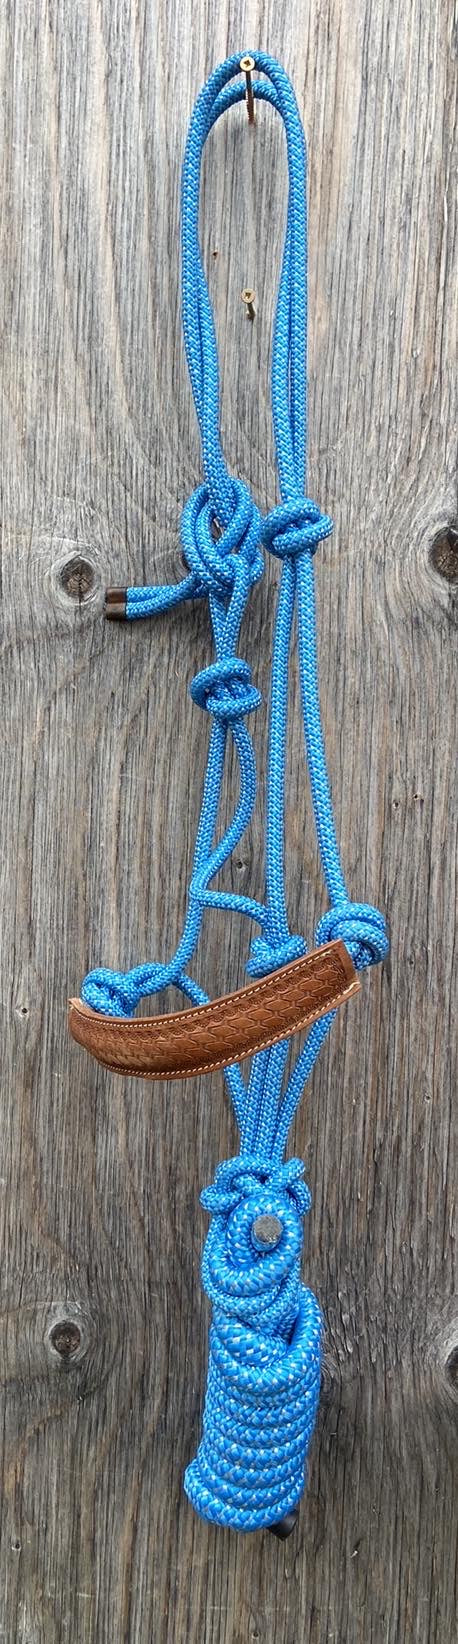 Rope halter with leather noseband